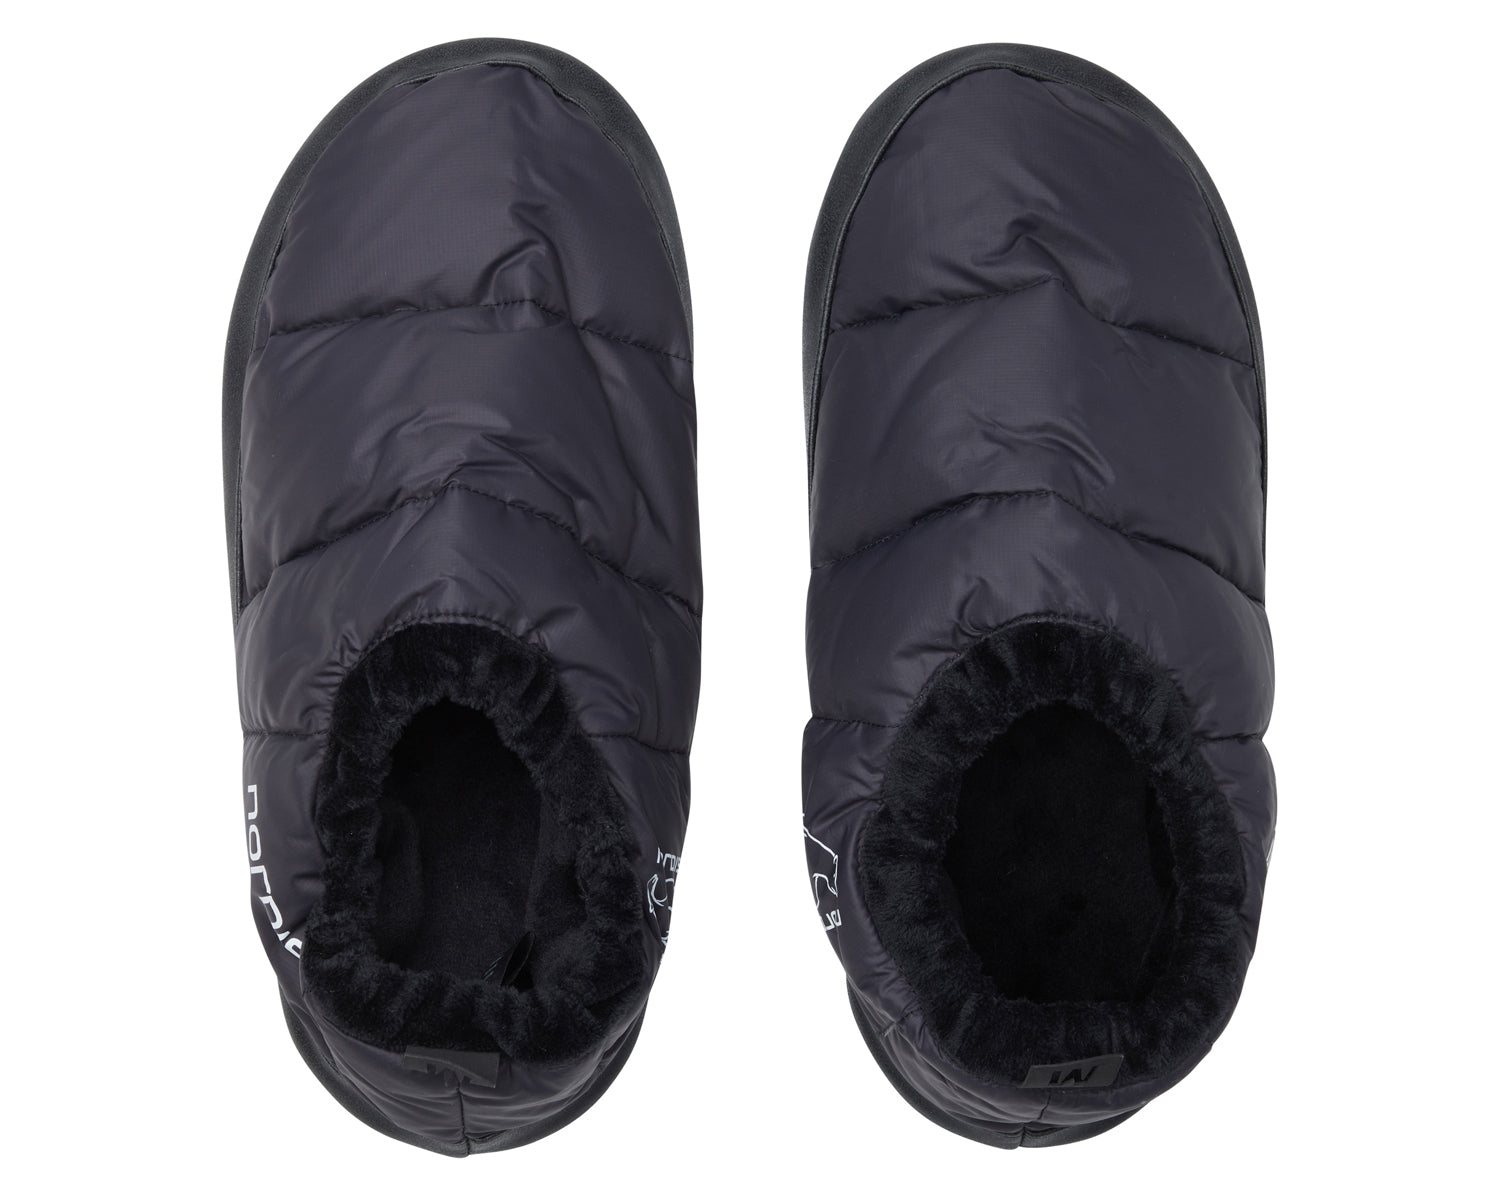 Mos down slippers - Black